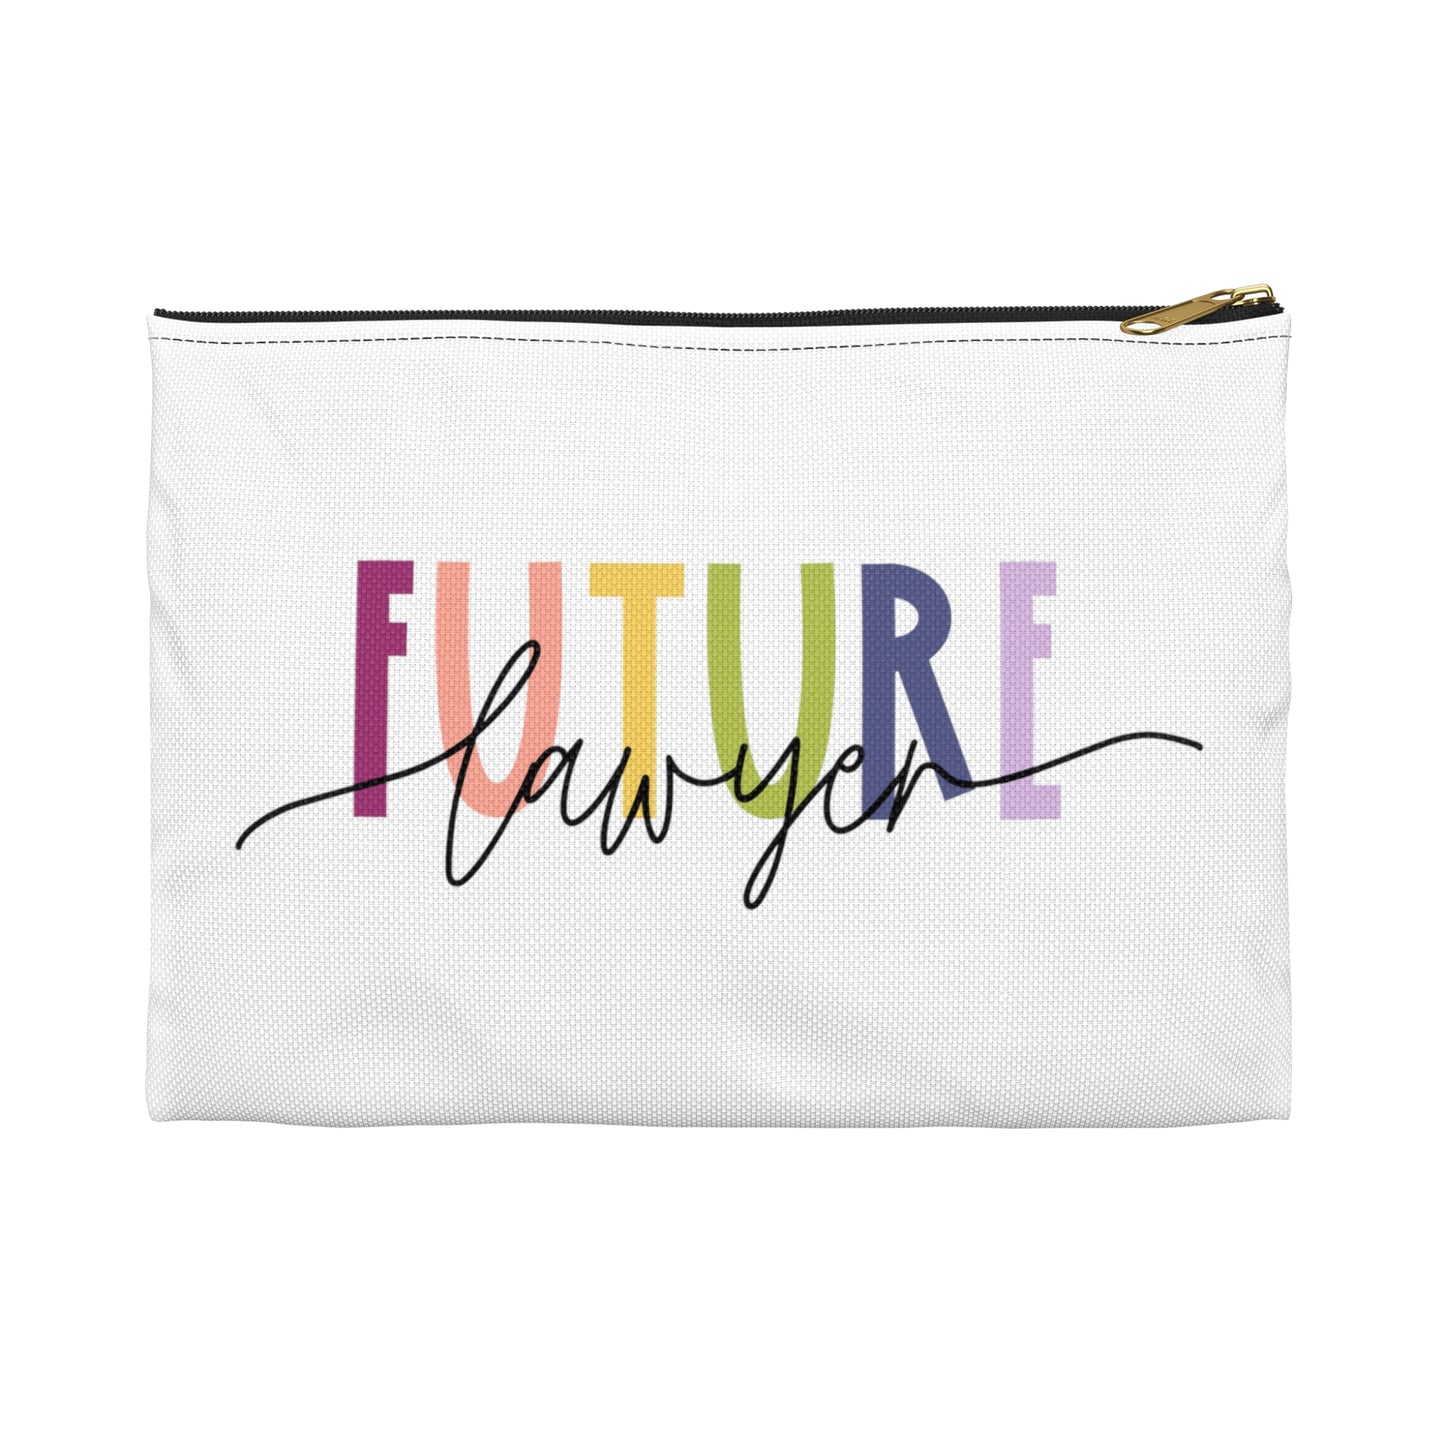 Future Lawyer Pencil Pouch